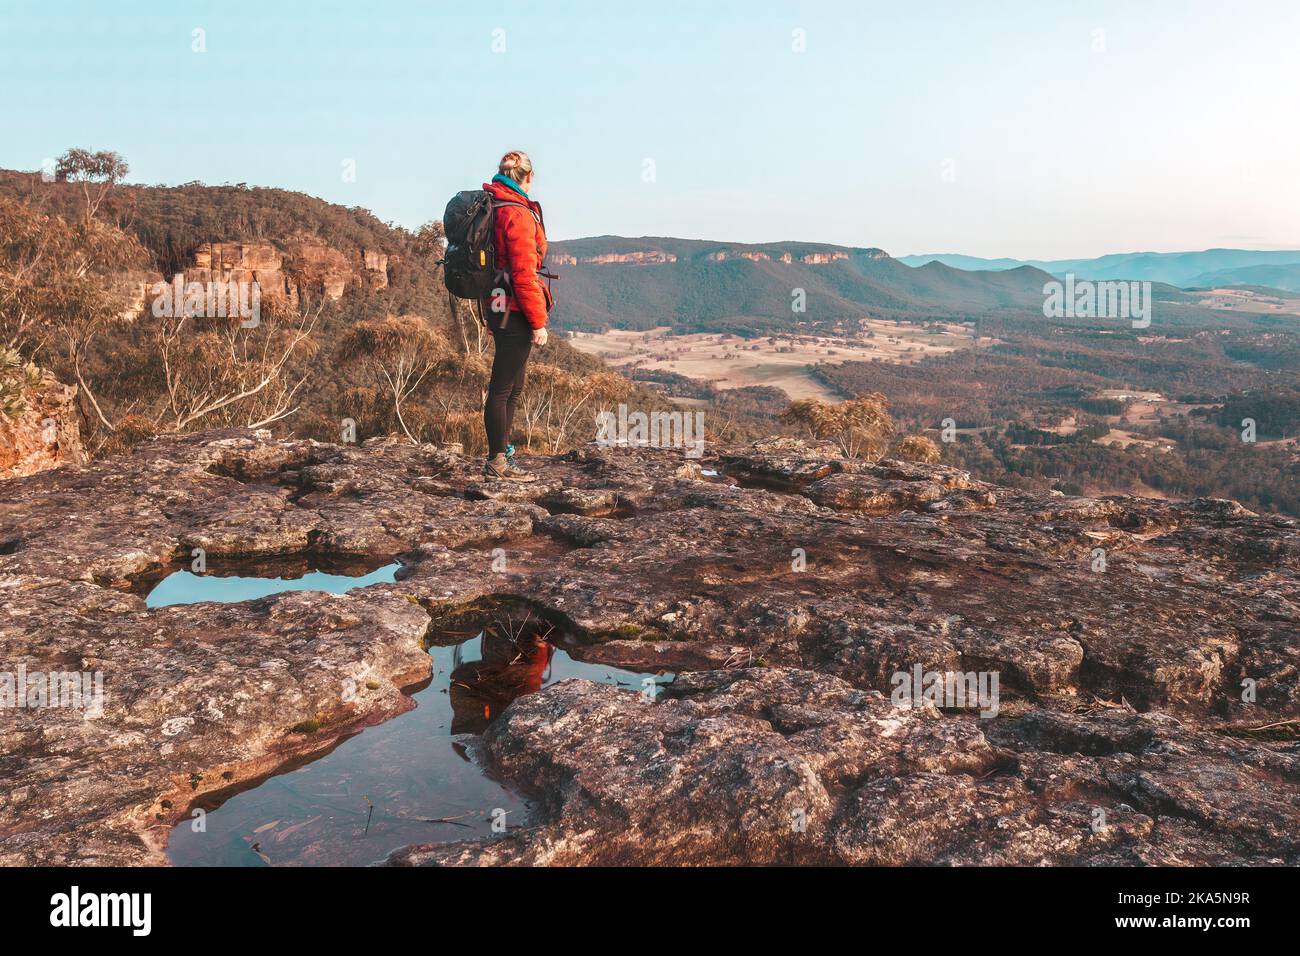 Female hiker at to the top of a rugged cliff face overlooking a valley and other mountains in the distance Stock Photo